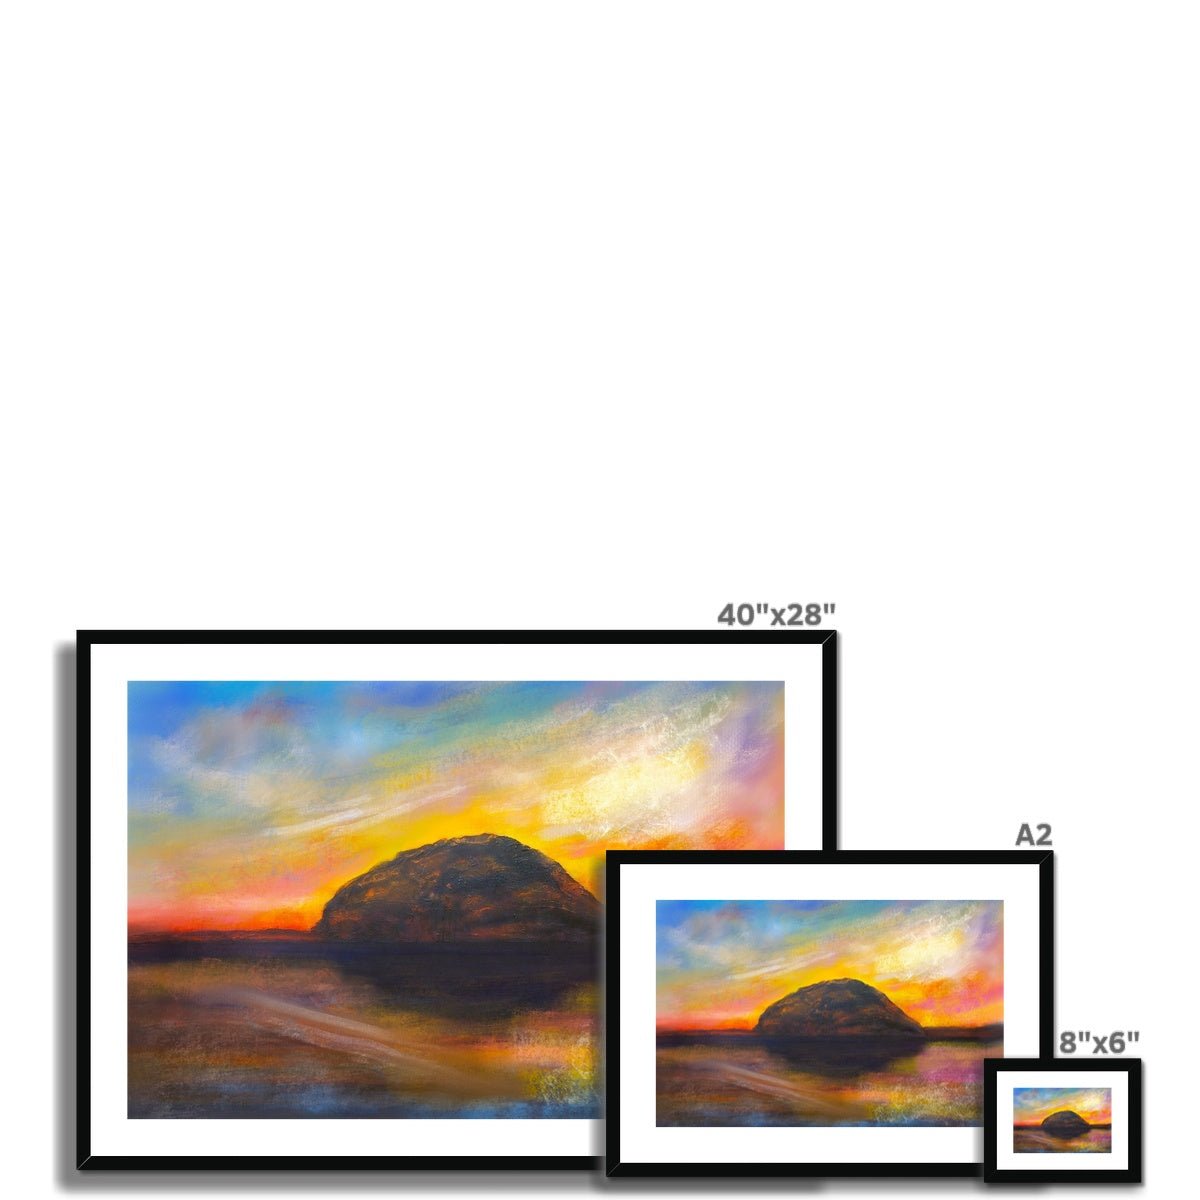 Ailsa Craig Dusk Painting | Framed & Mounted Prints From Scotland-Framed & Mounted Prints-Arran Art Gallery-Paintings, Prints, Homeware, Art Gifts From Scotland By Scottish Artist Kevin Hunter